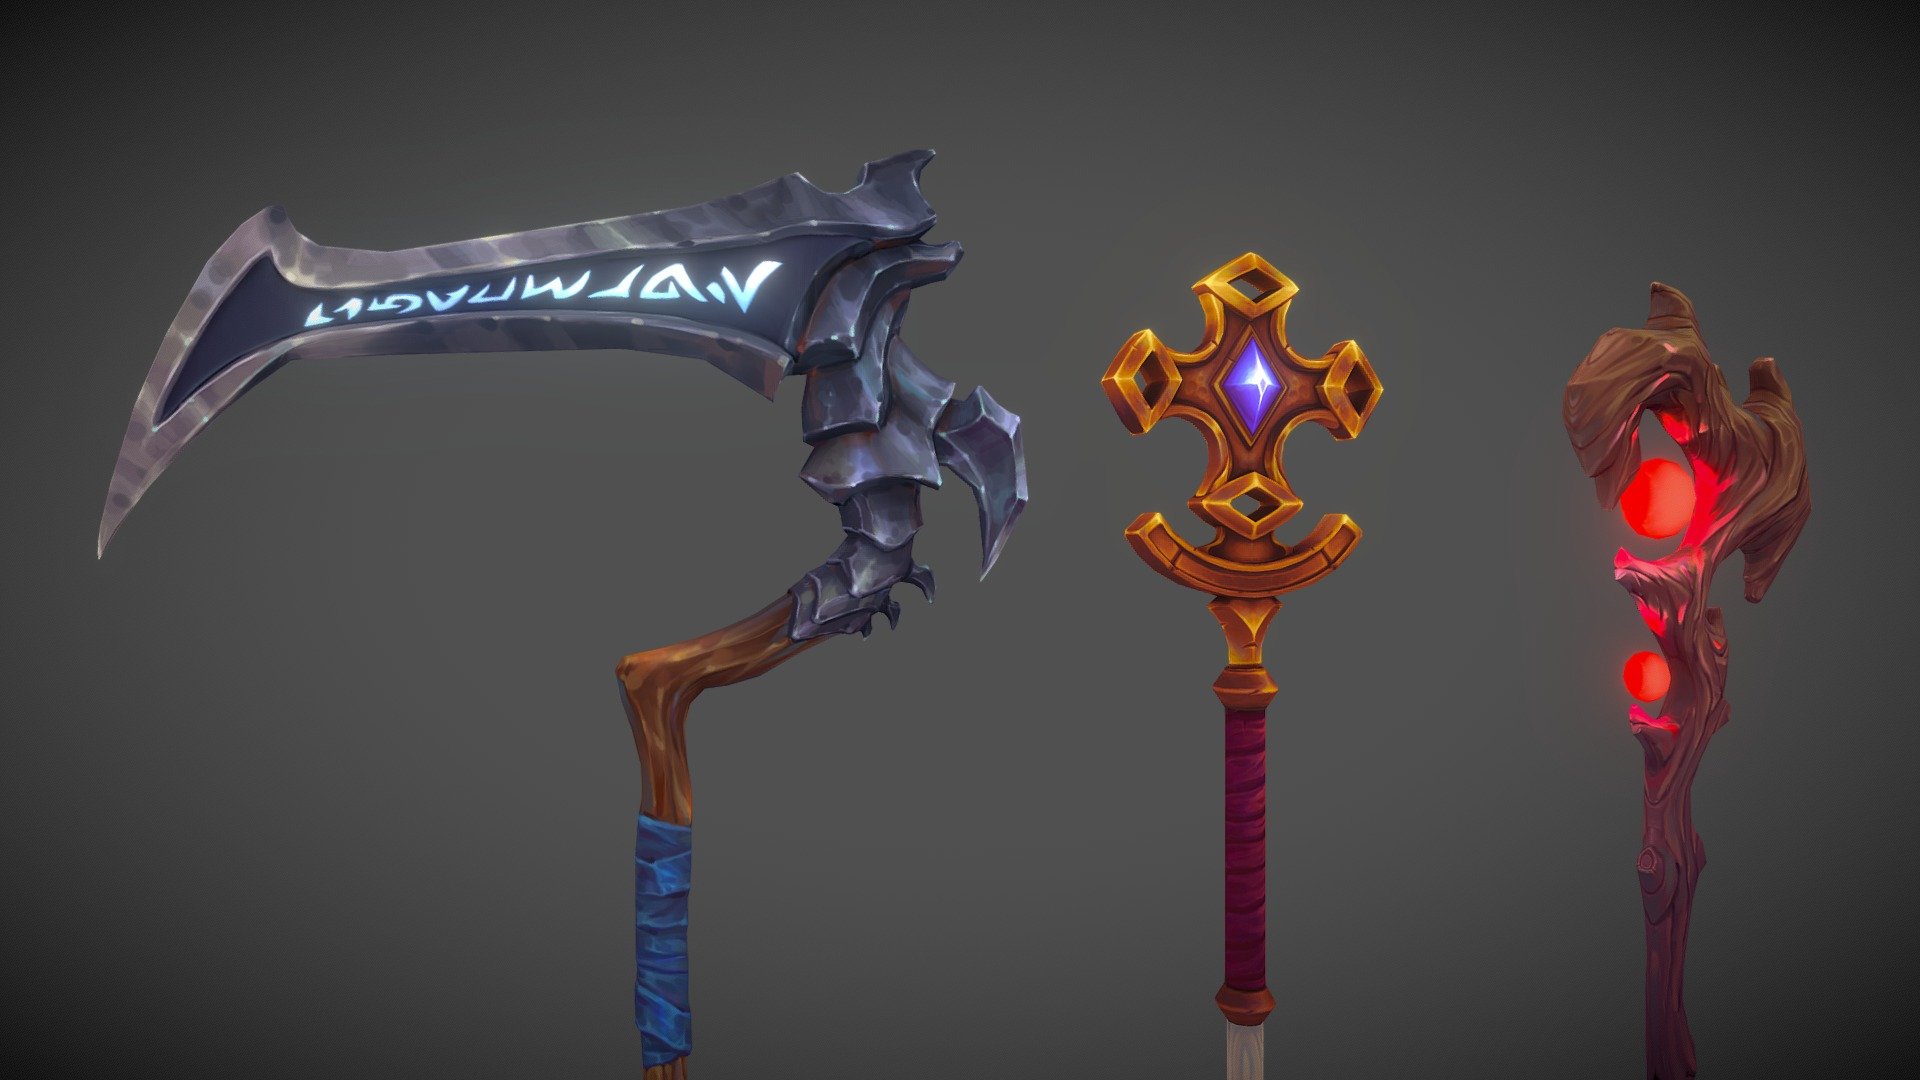 Stylized weapons for a project.

Software used: Zbrush, Autodesk Maya, Autodesk 3ds Max, Substance Painter - Stylized Fantasy Staves - 3D model by N-hance Studio (@Malice6731) 3d model